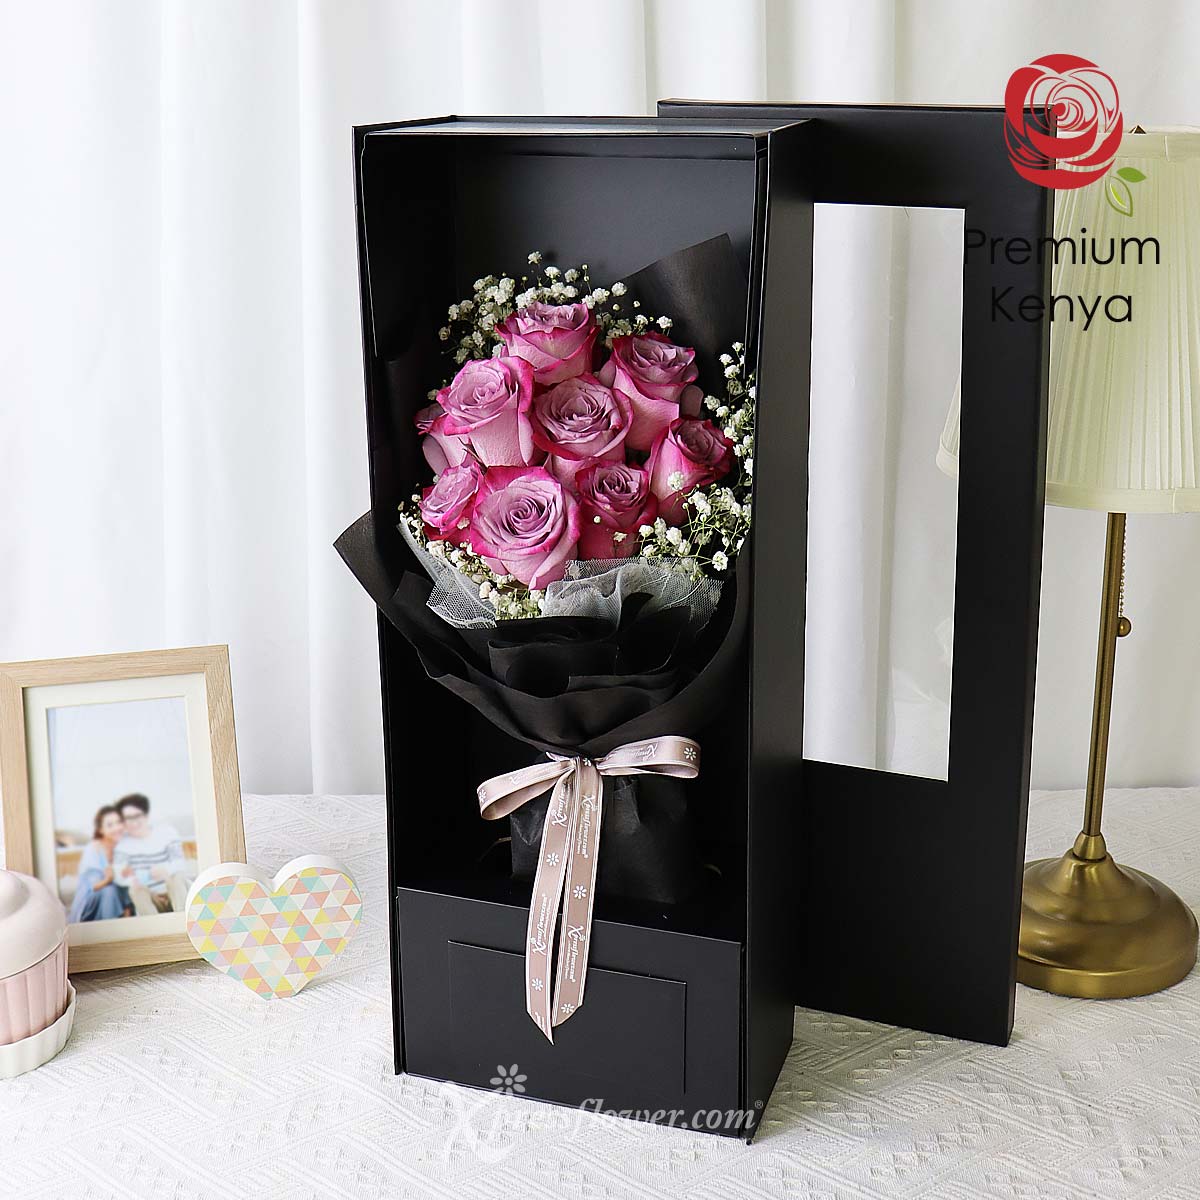 SNBQ2301 Darling Sweetheart (9 Yam Roses Sanrio Bouquet) 3a